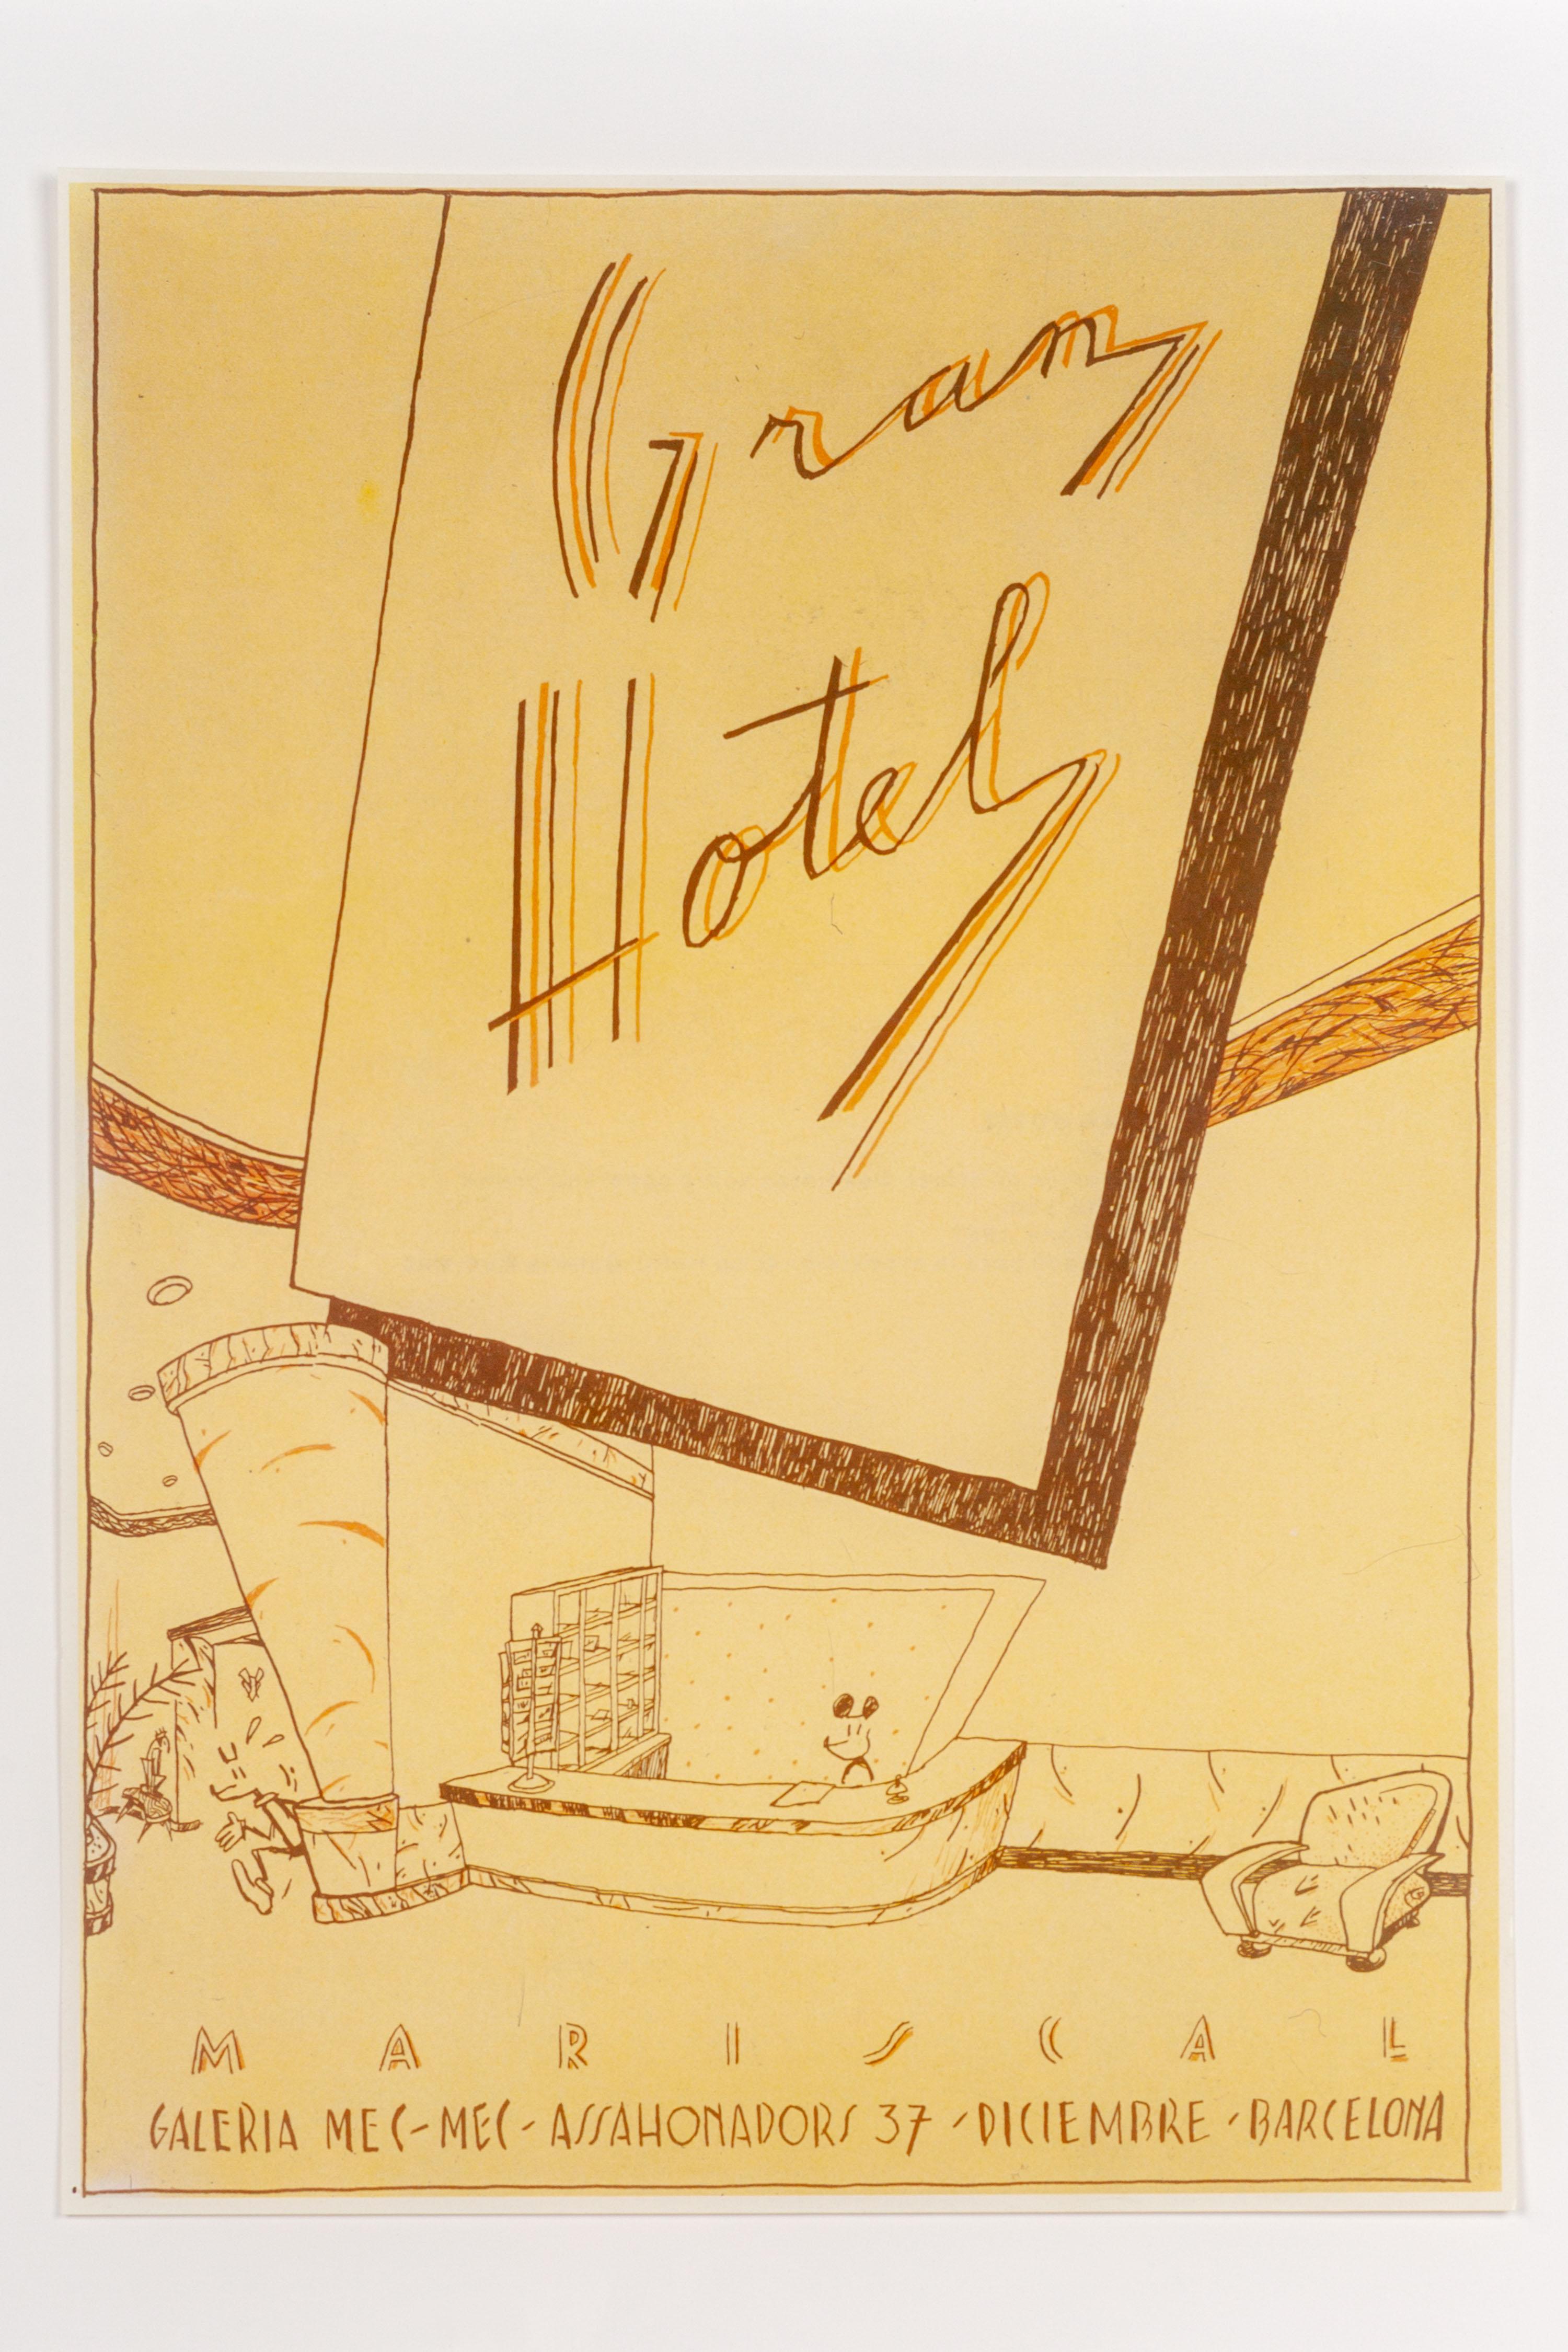 Post-Modern “Grand Hotel” Javier Mariscal 1977 first solo exhibition poster, 1980s re-print For Sale